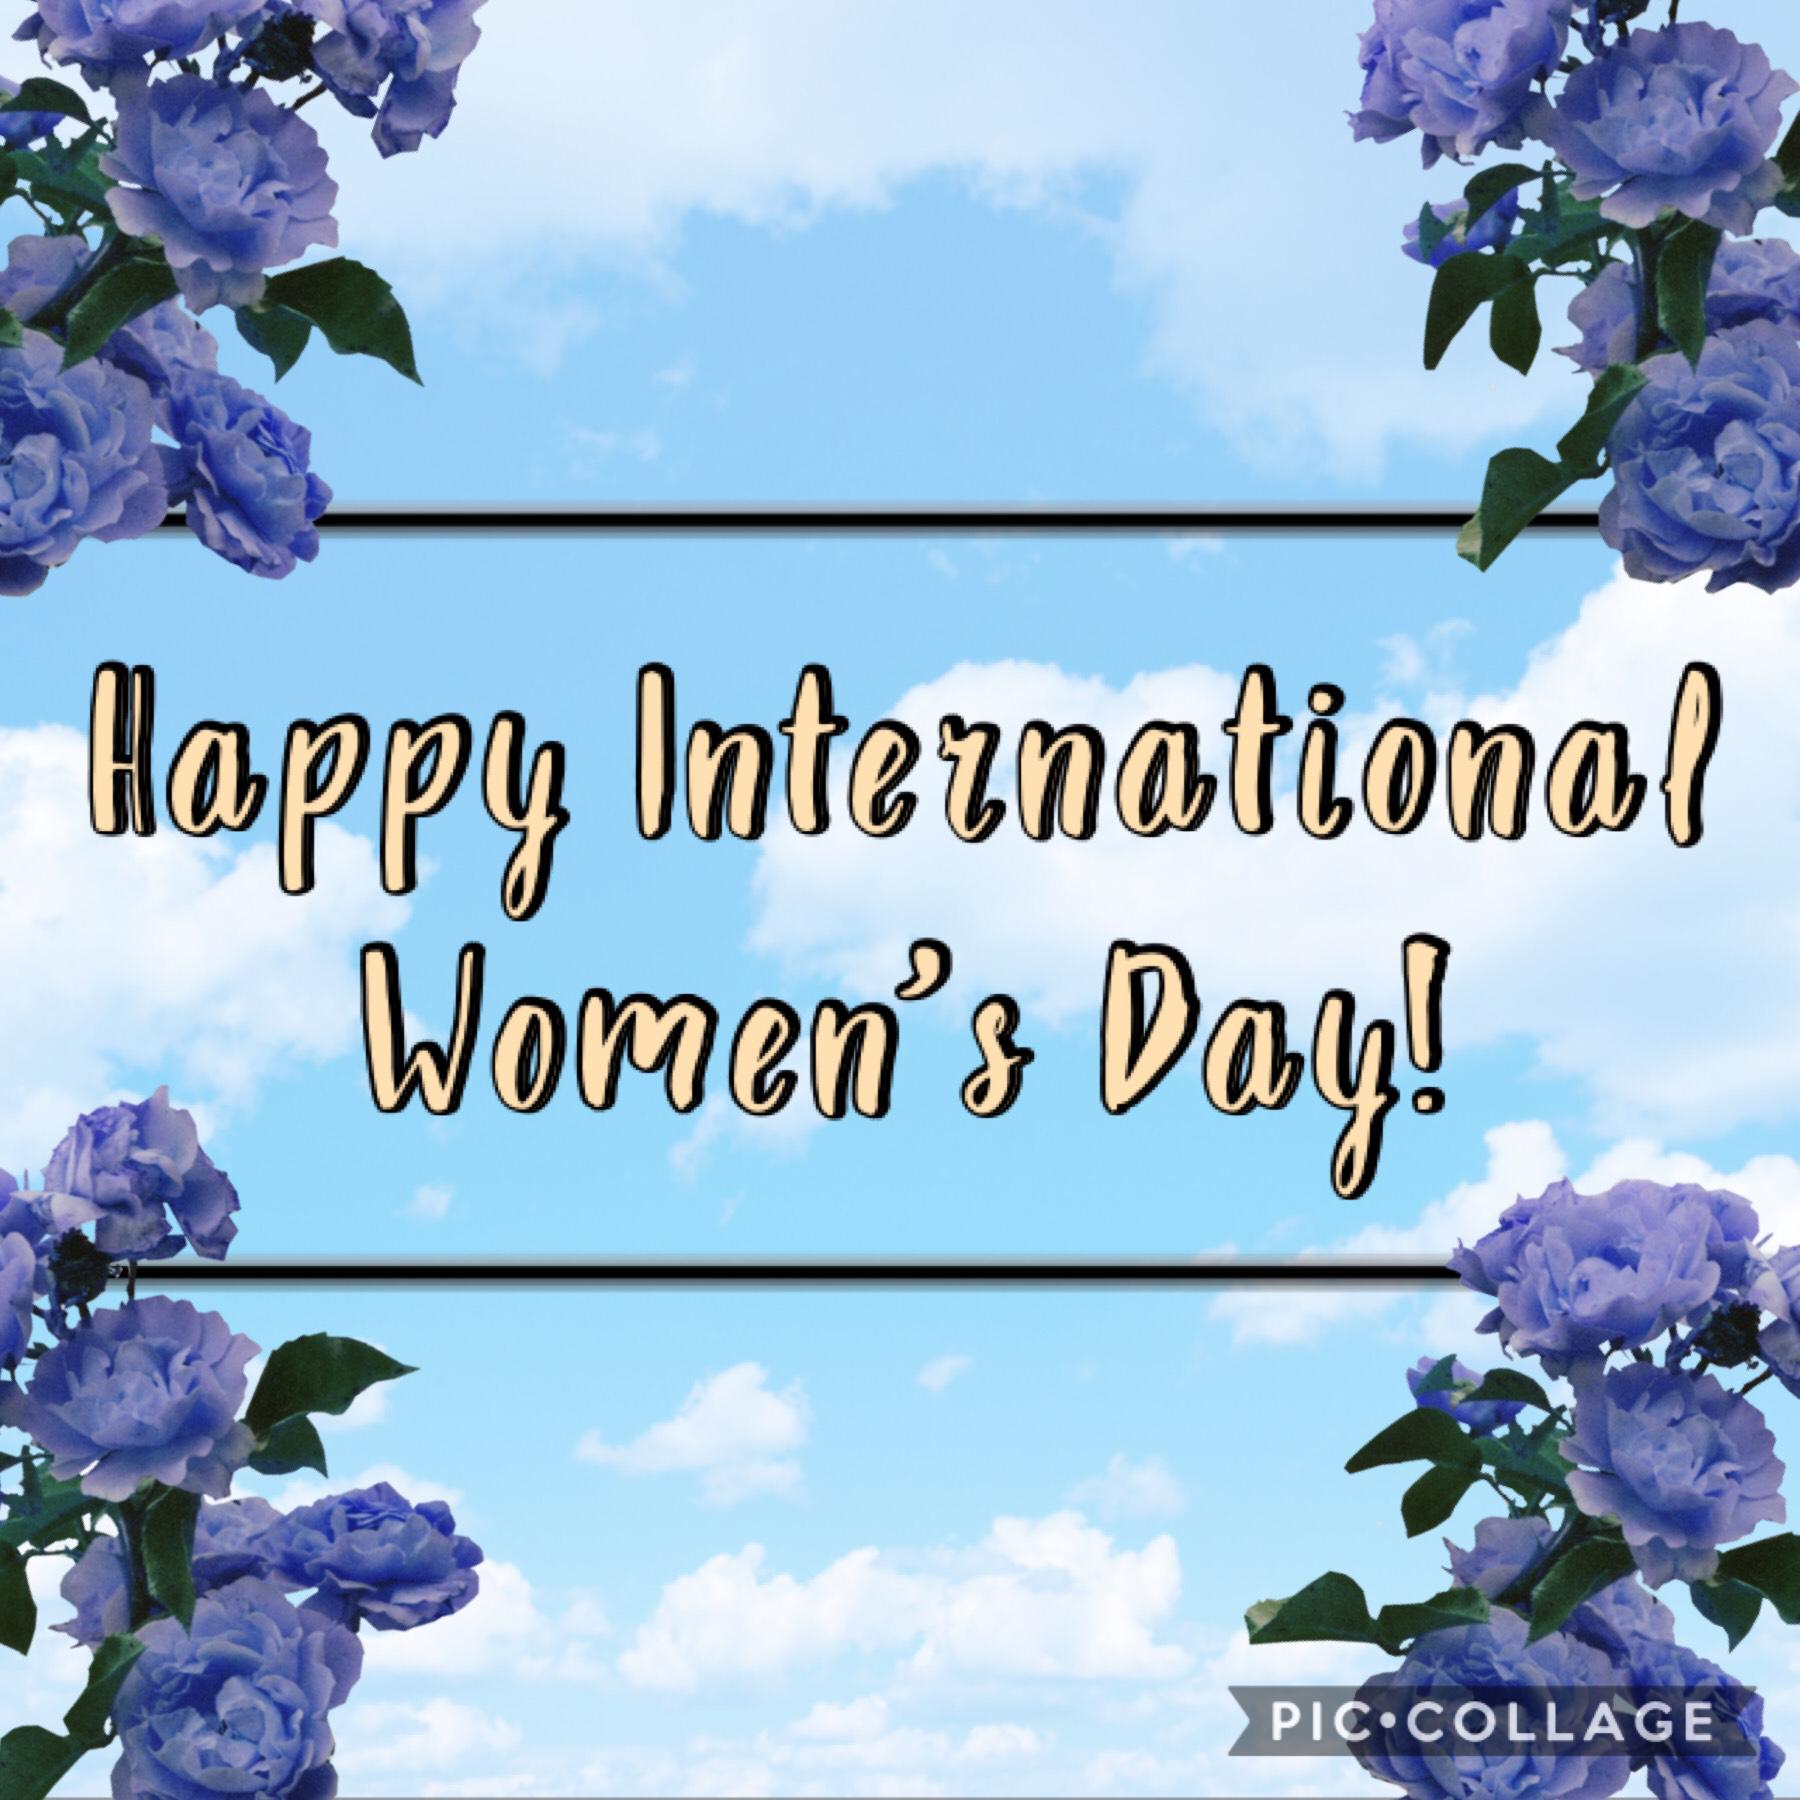 Happy International Women’s Day! 👑 🚺 💪🏻 💪🏼 💪🏽 💪🏾 💪🏿 💙 👩🏻‍🦲 🧕🏻 👱🏻‍♀️ 👩🏻‍🦰 👩🏻 👩🏽‍🦱 👩🏾 👩🏿 👩🏻‍🦳 🧬 It’s also Middle Name Pride Day. 😆 QOTN: What’s yours? 🧐 AOTN: Hope. 🌈 My mom is gonna trim my hair later, it’s getting kinda long again... 😬 ✂️ 🤞🏻